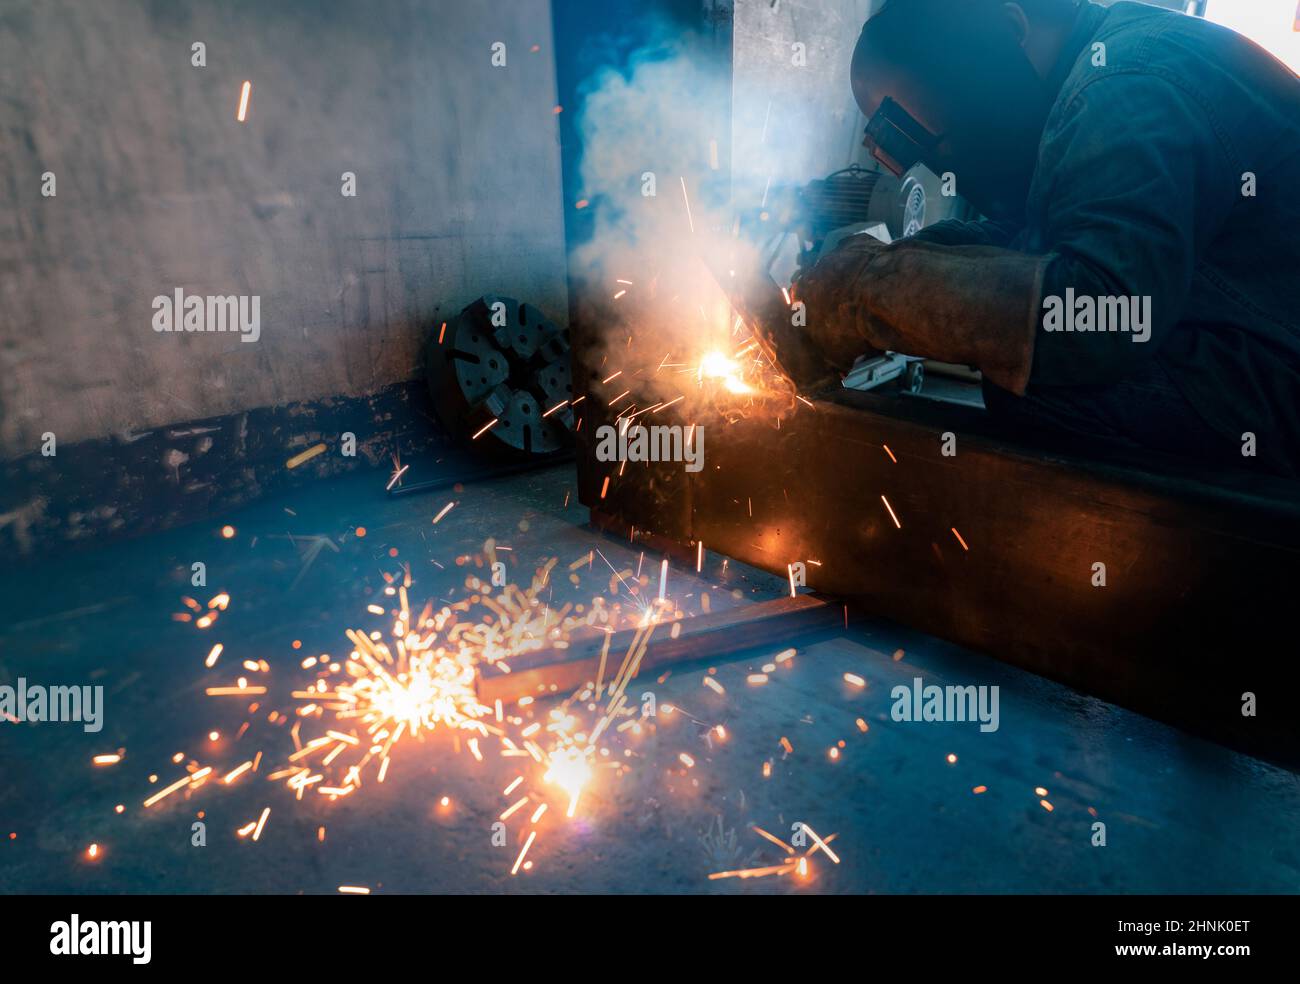 Welder welding metal with argon arc welding machine and has welding sparks. Man wears a welding mask and gloves. Safety in industrial workplace. Welder working with safety. Steel industry technology. Stock Photo